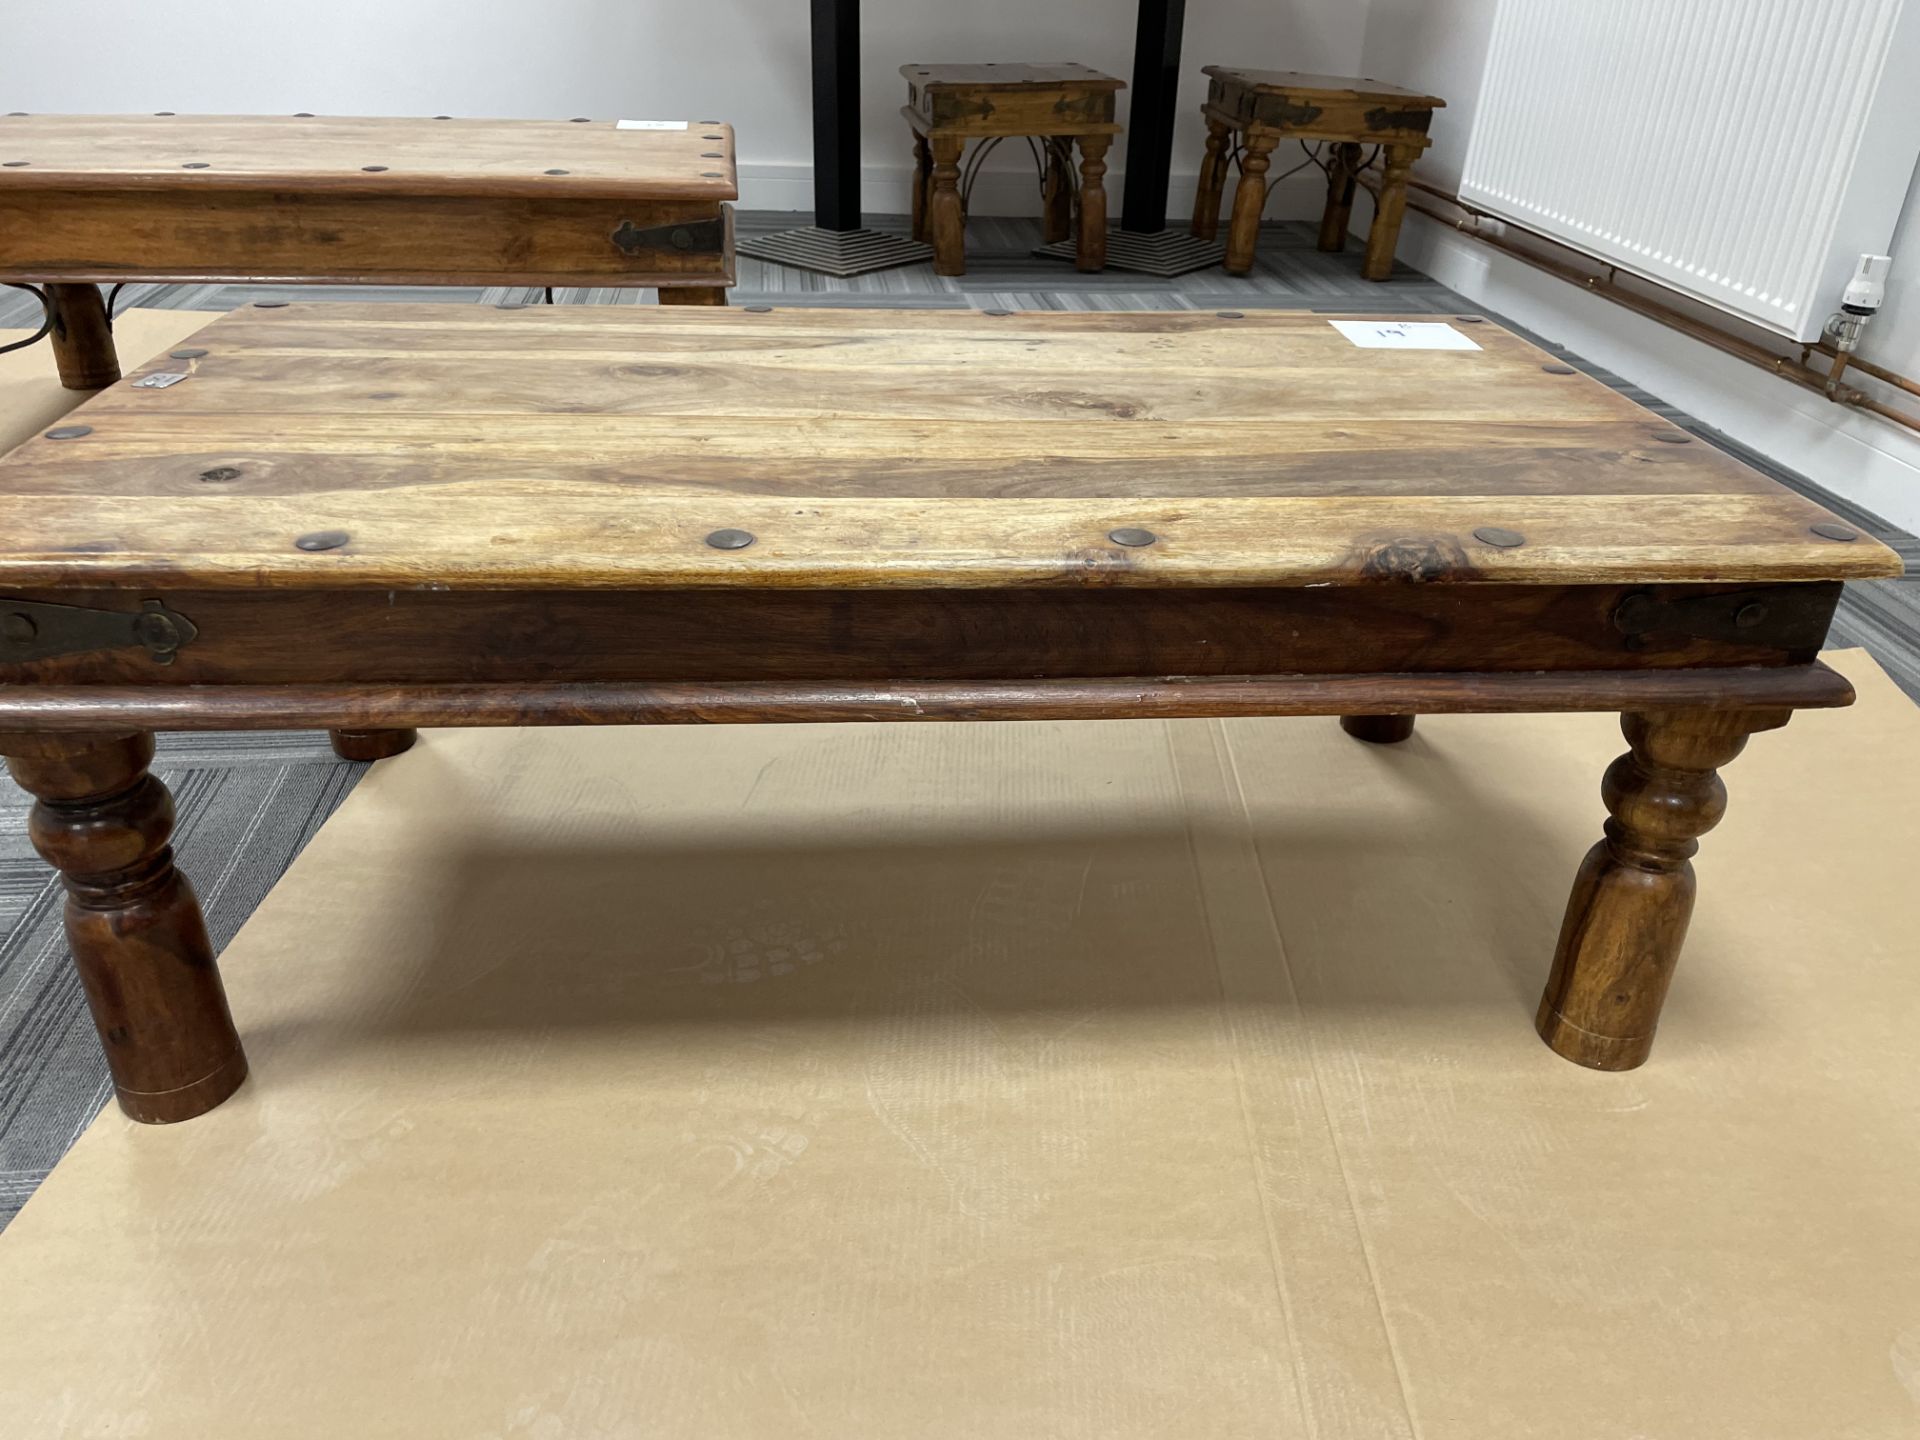 ANTIQUE LOOK COFFEE TABLE 1110 x 620